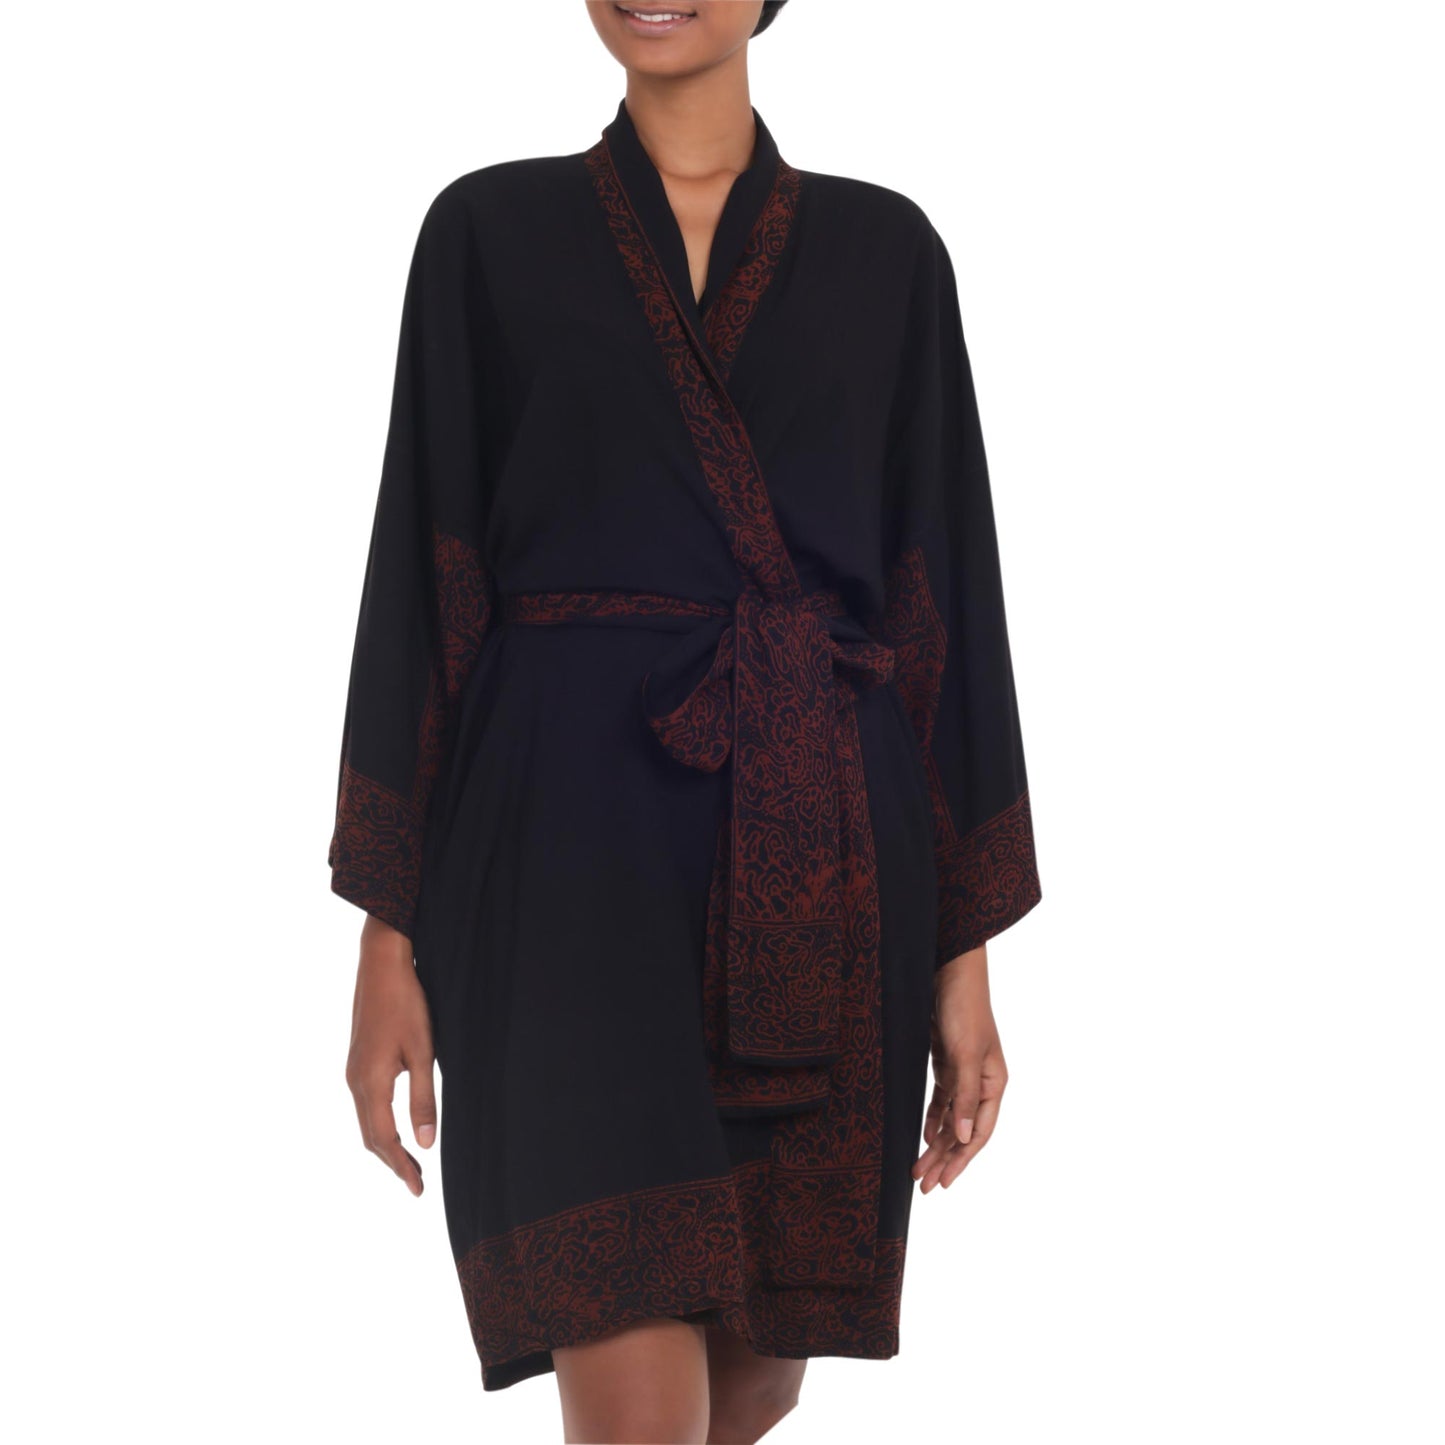 Bewitching Blossom Short Rayon Robe